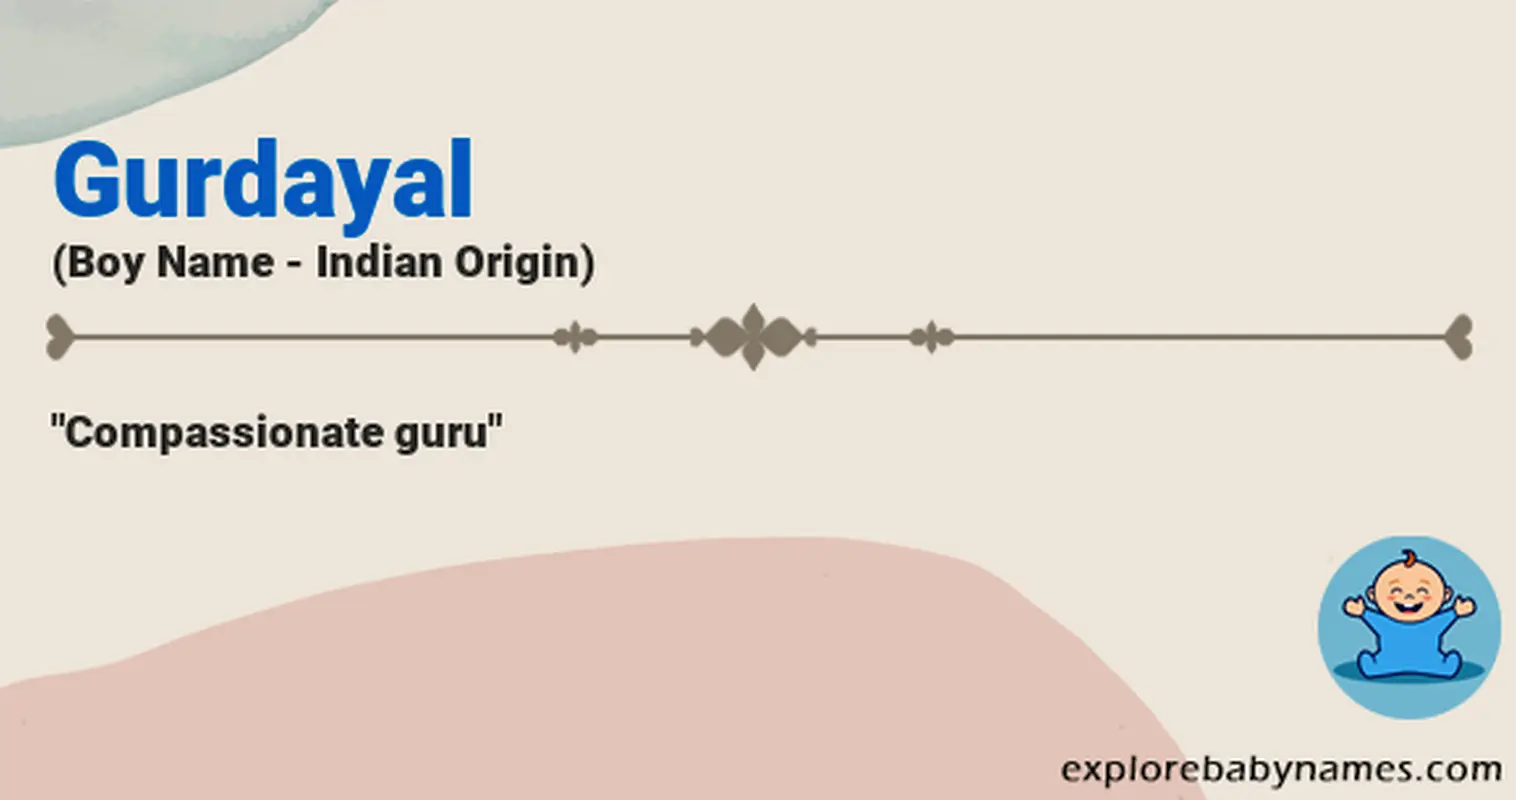 Meaning of Gurdayal